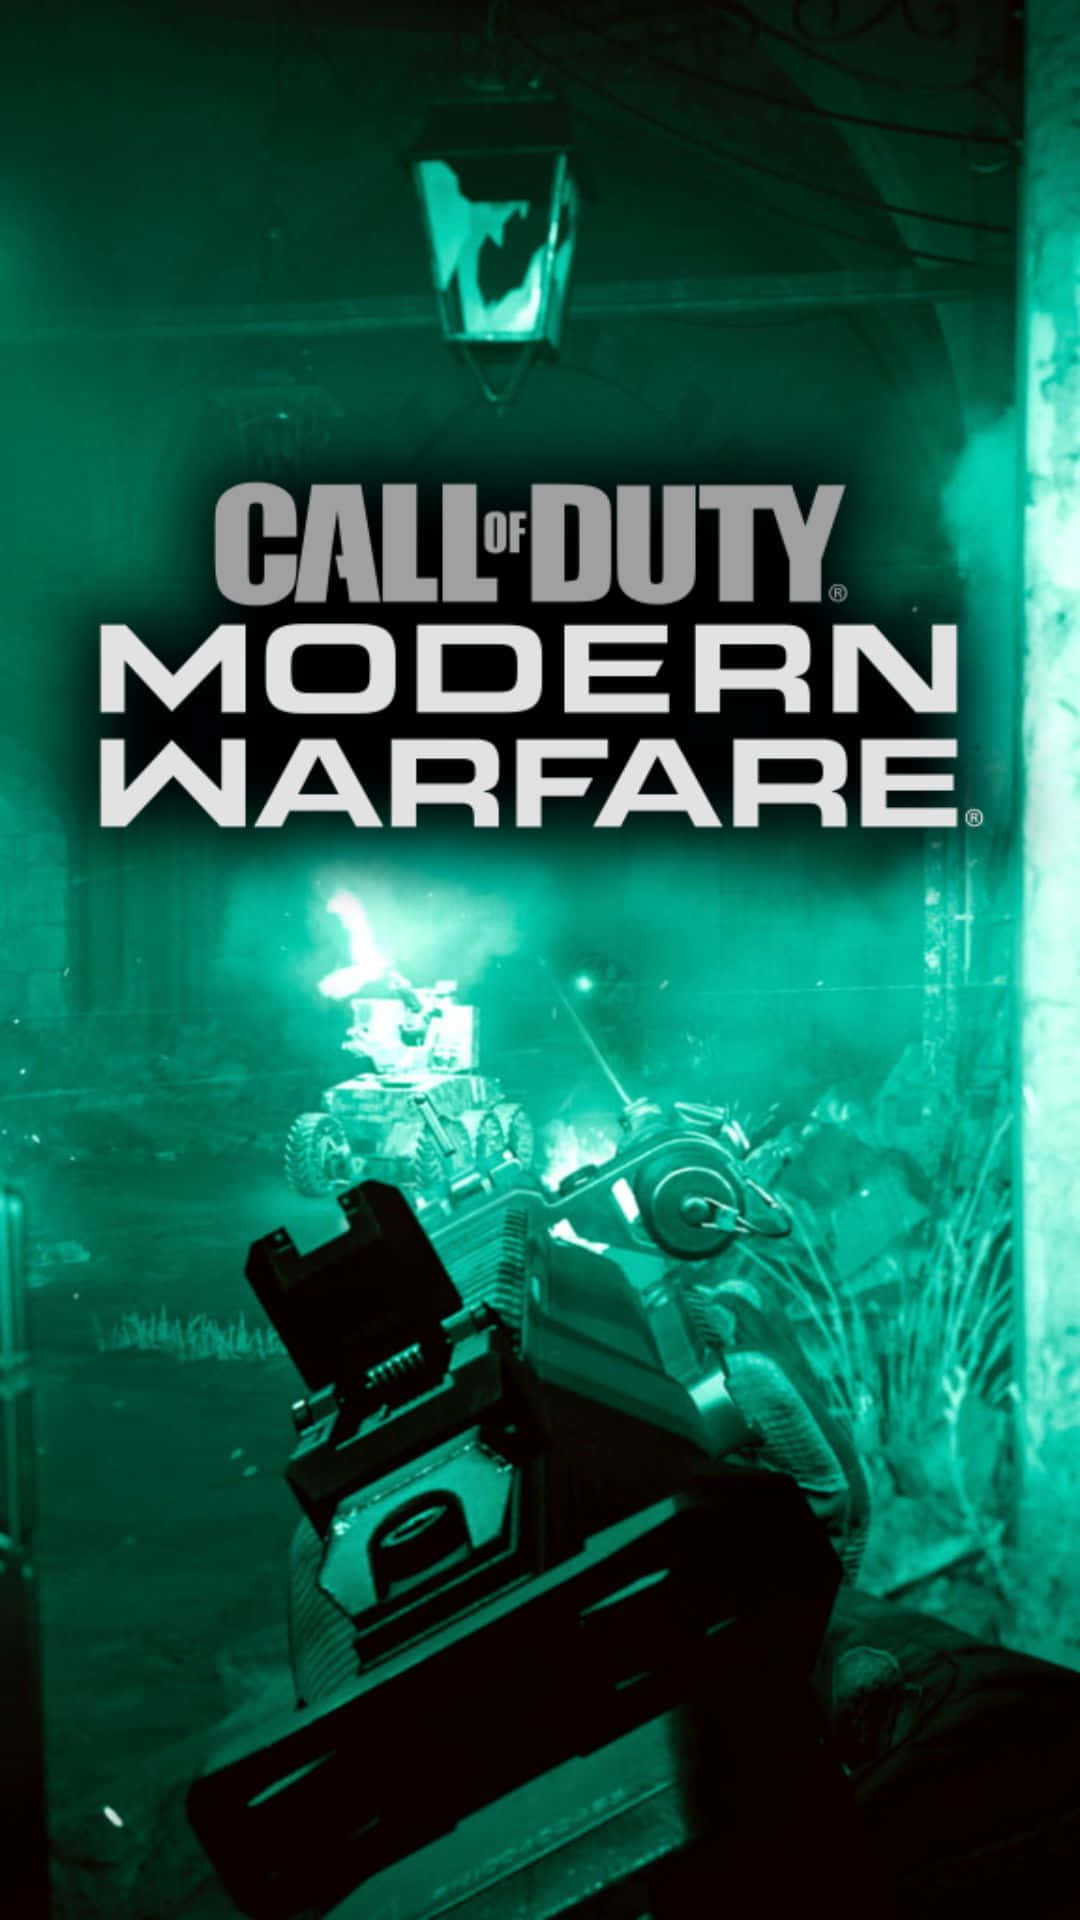 Ready for Battle: Android Call of Duty Modern Warfare